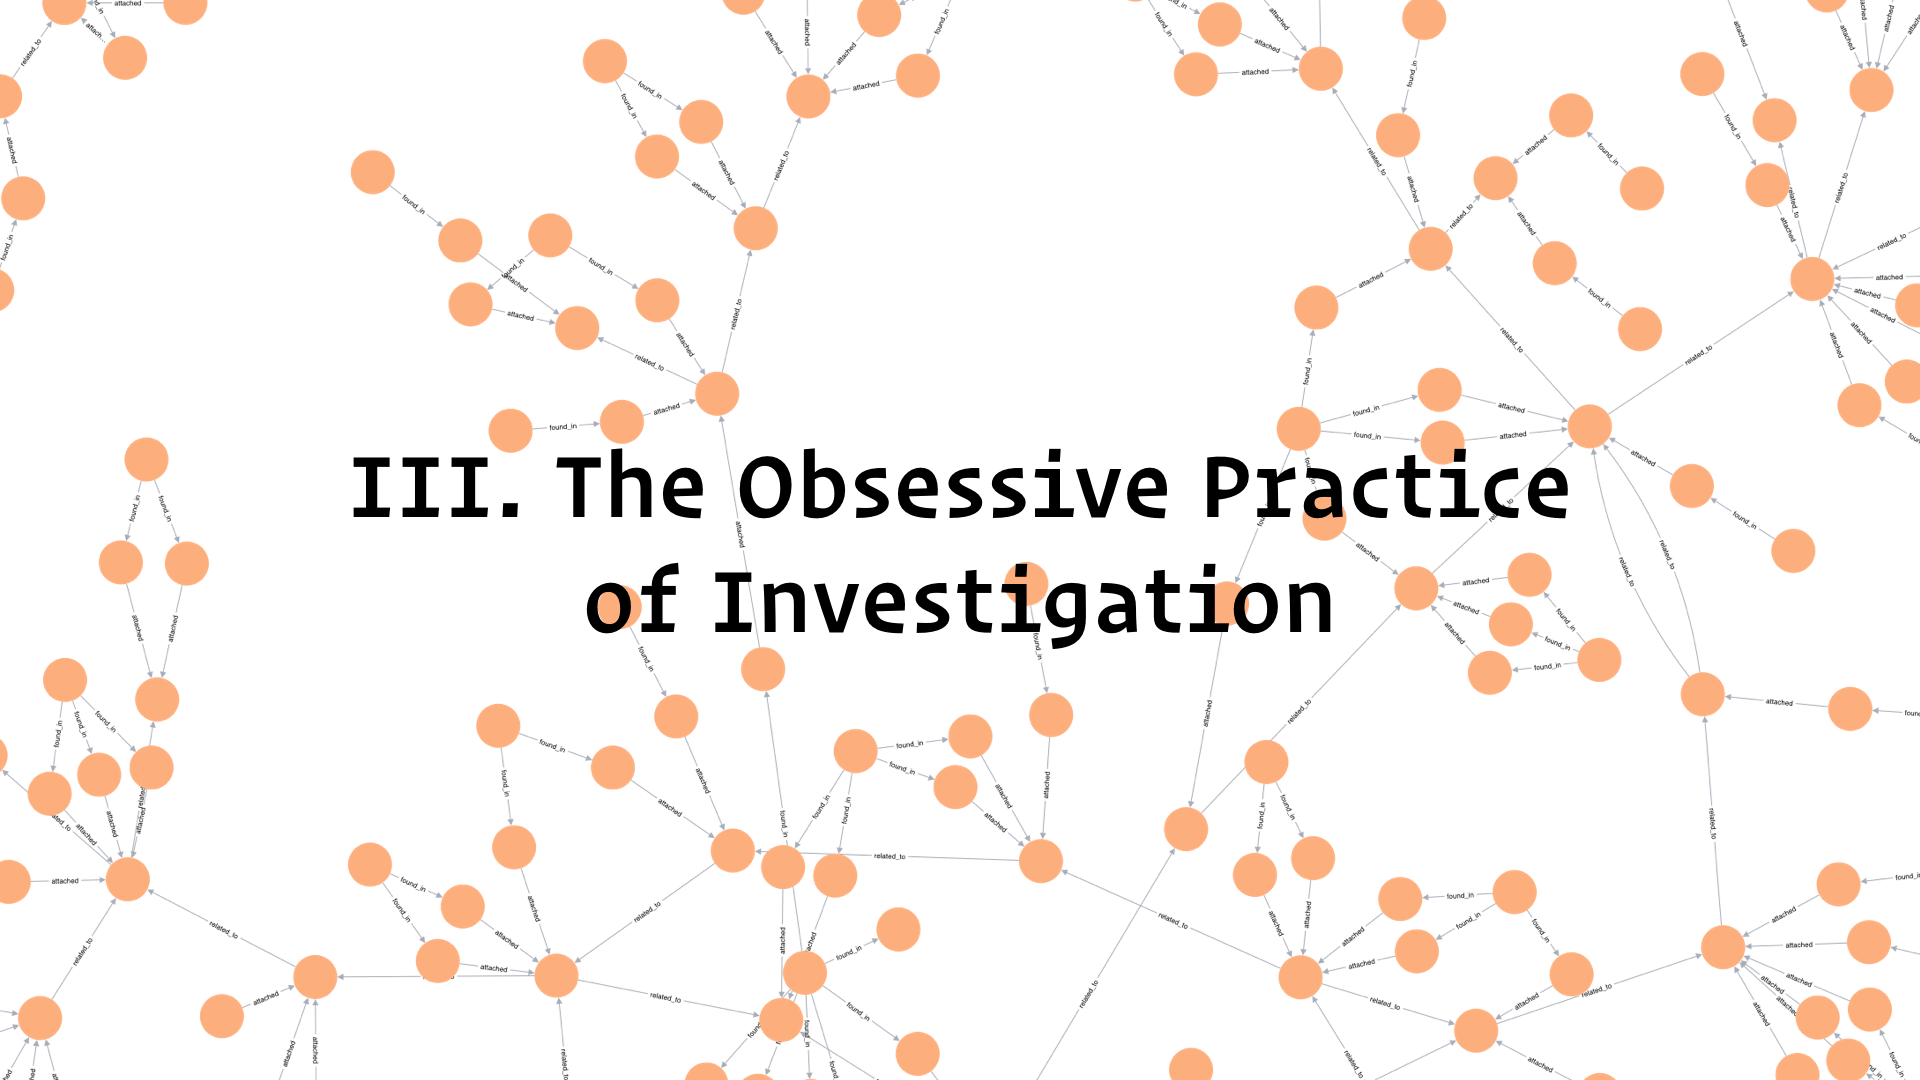 III. The Obsessive Practice of Investigation